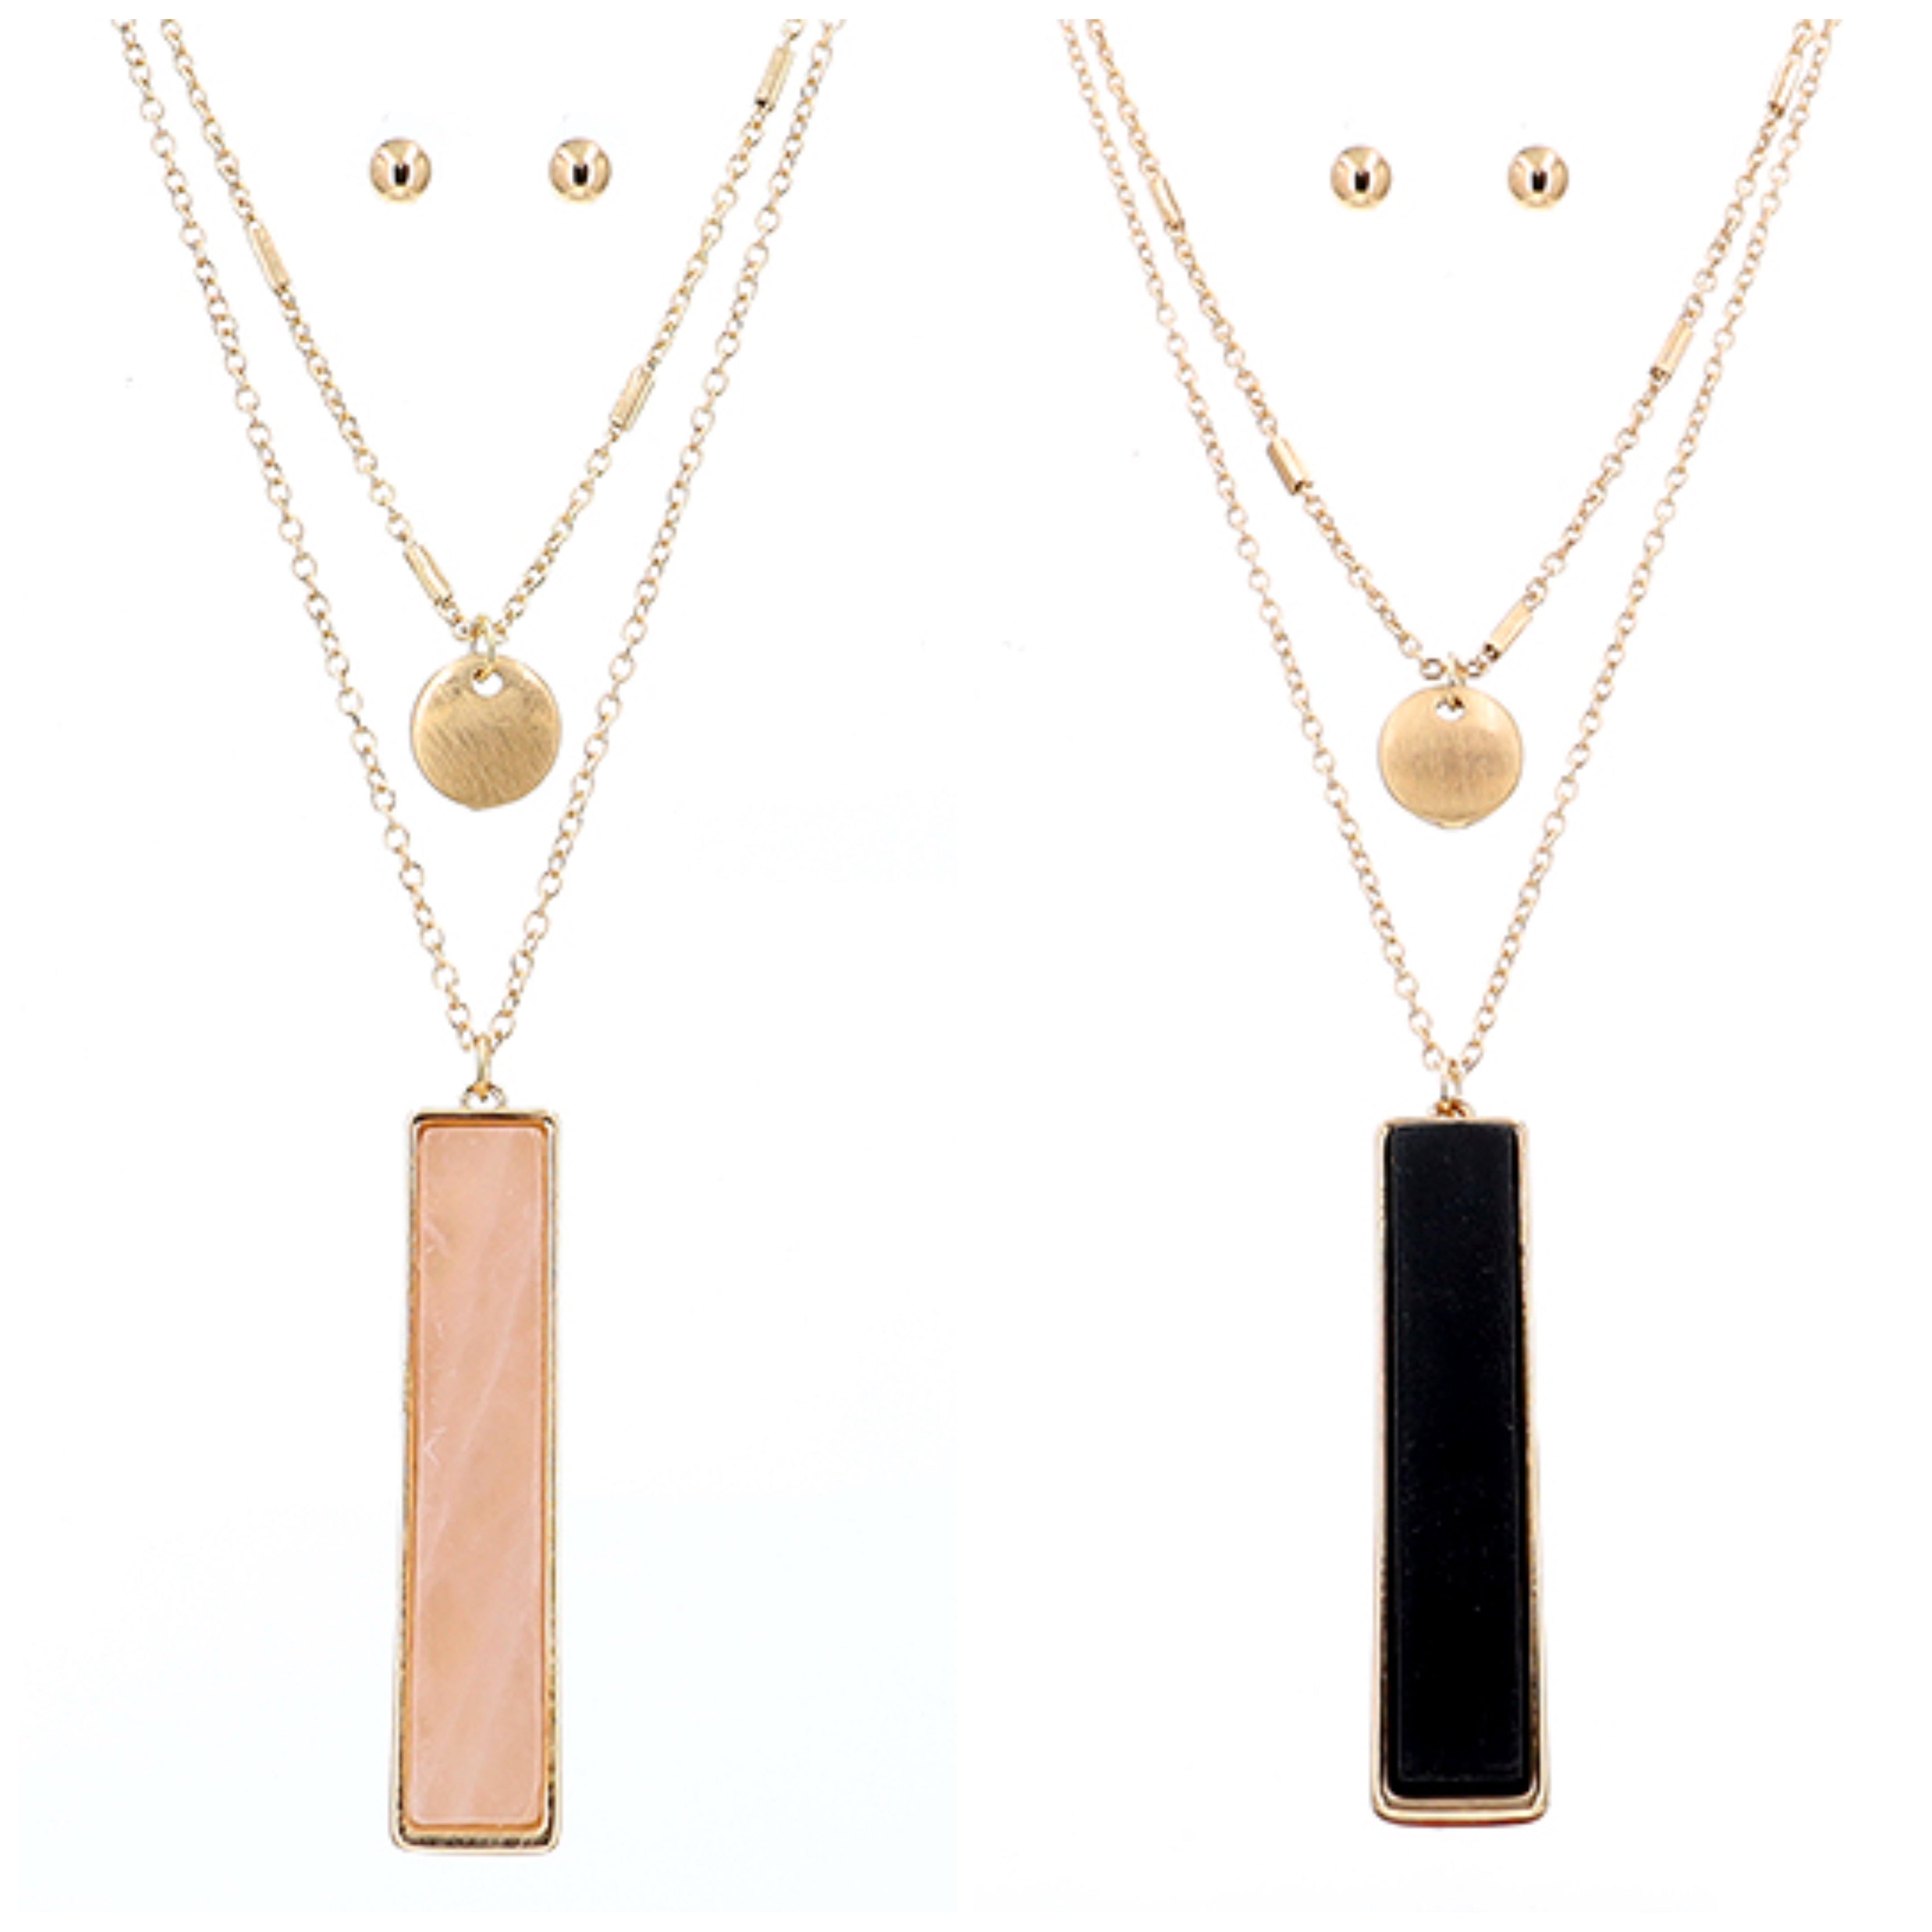 Layered stone and gold necklace earring set